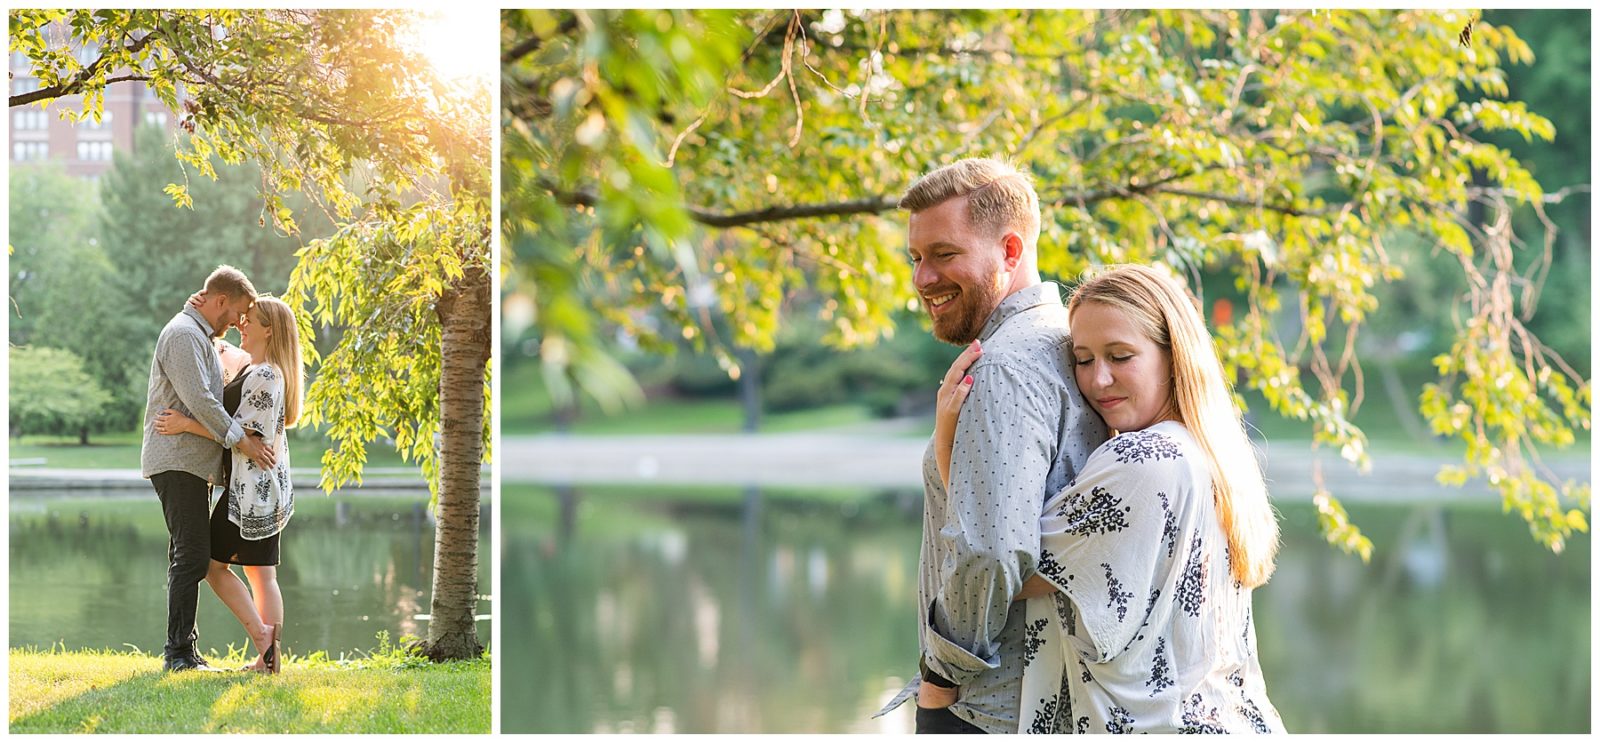 A Cleveland engagement session, wade lagoon photos, summer photos, sweet and candid photos, romantic engagement photos, outfit ideas, soft floral dress, willow tree, light post photos